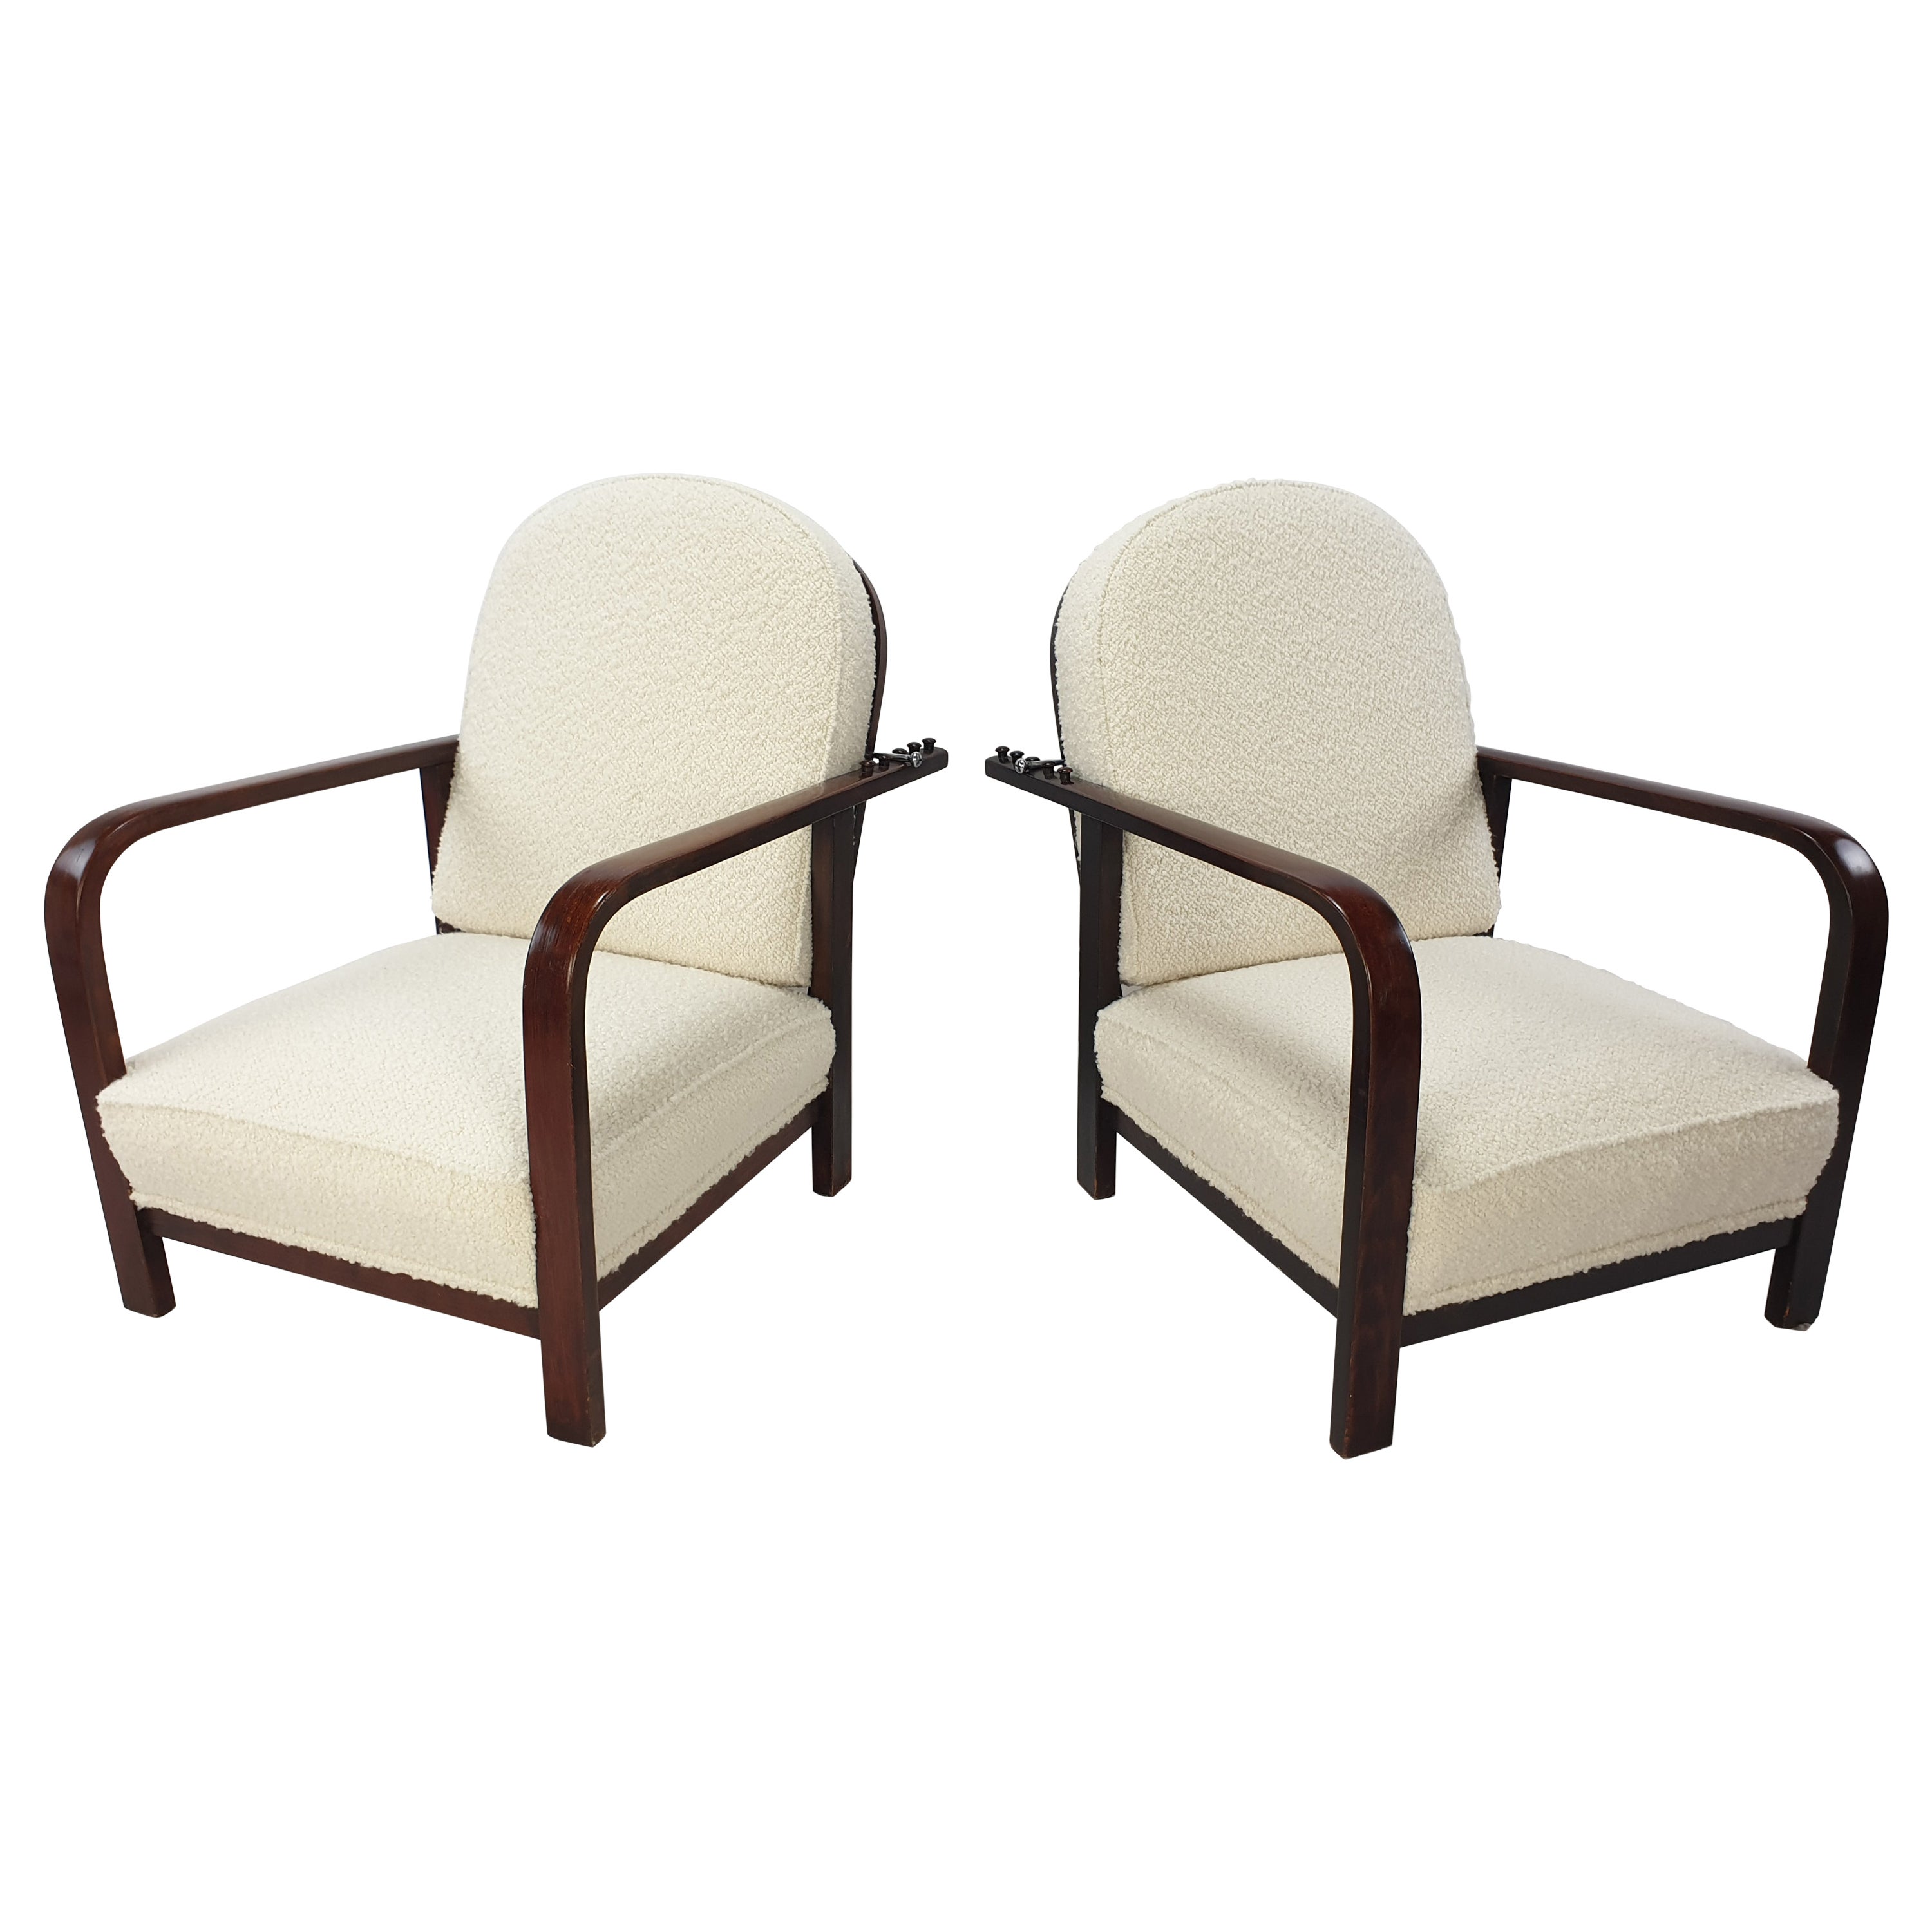 Pair of Adjustable Lounge Chairs by Thonet, 1930's For Sale